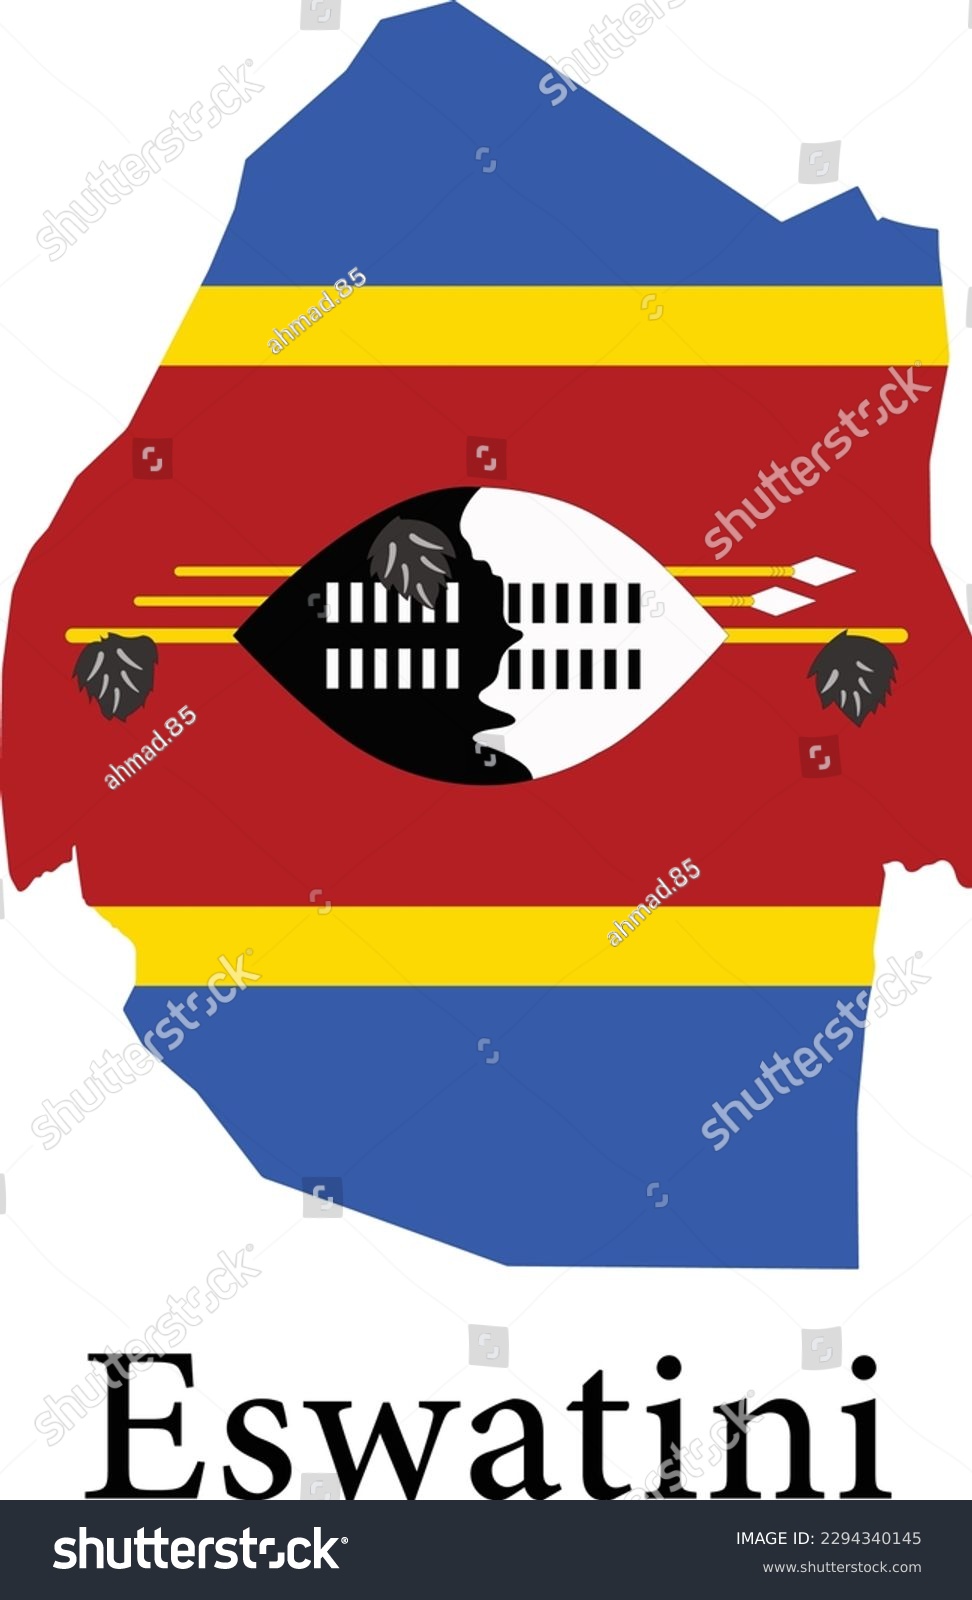 SVG of eswatini flag vector illustration, flag in shape of an Eswatini map. svg